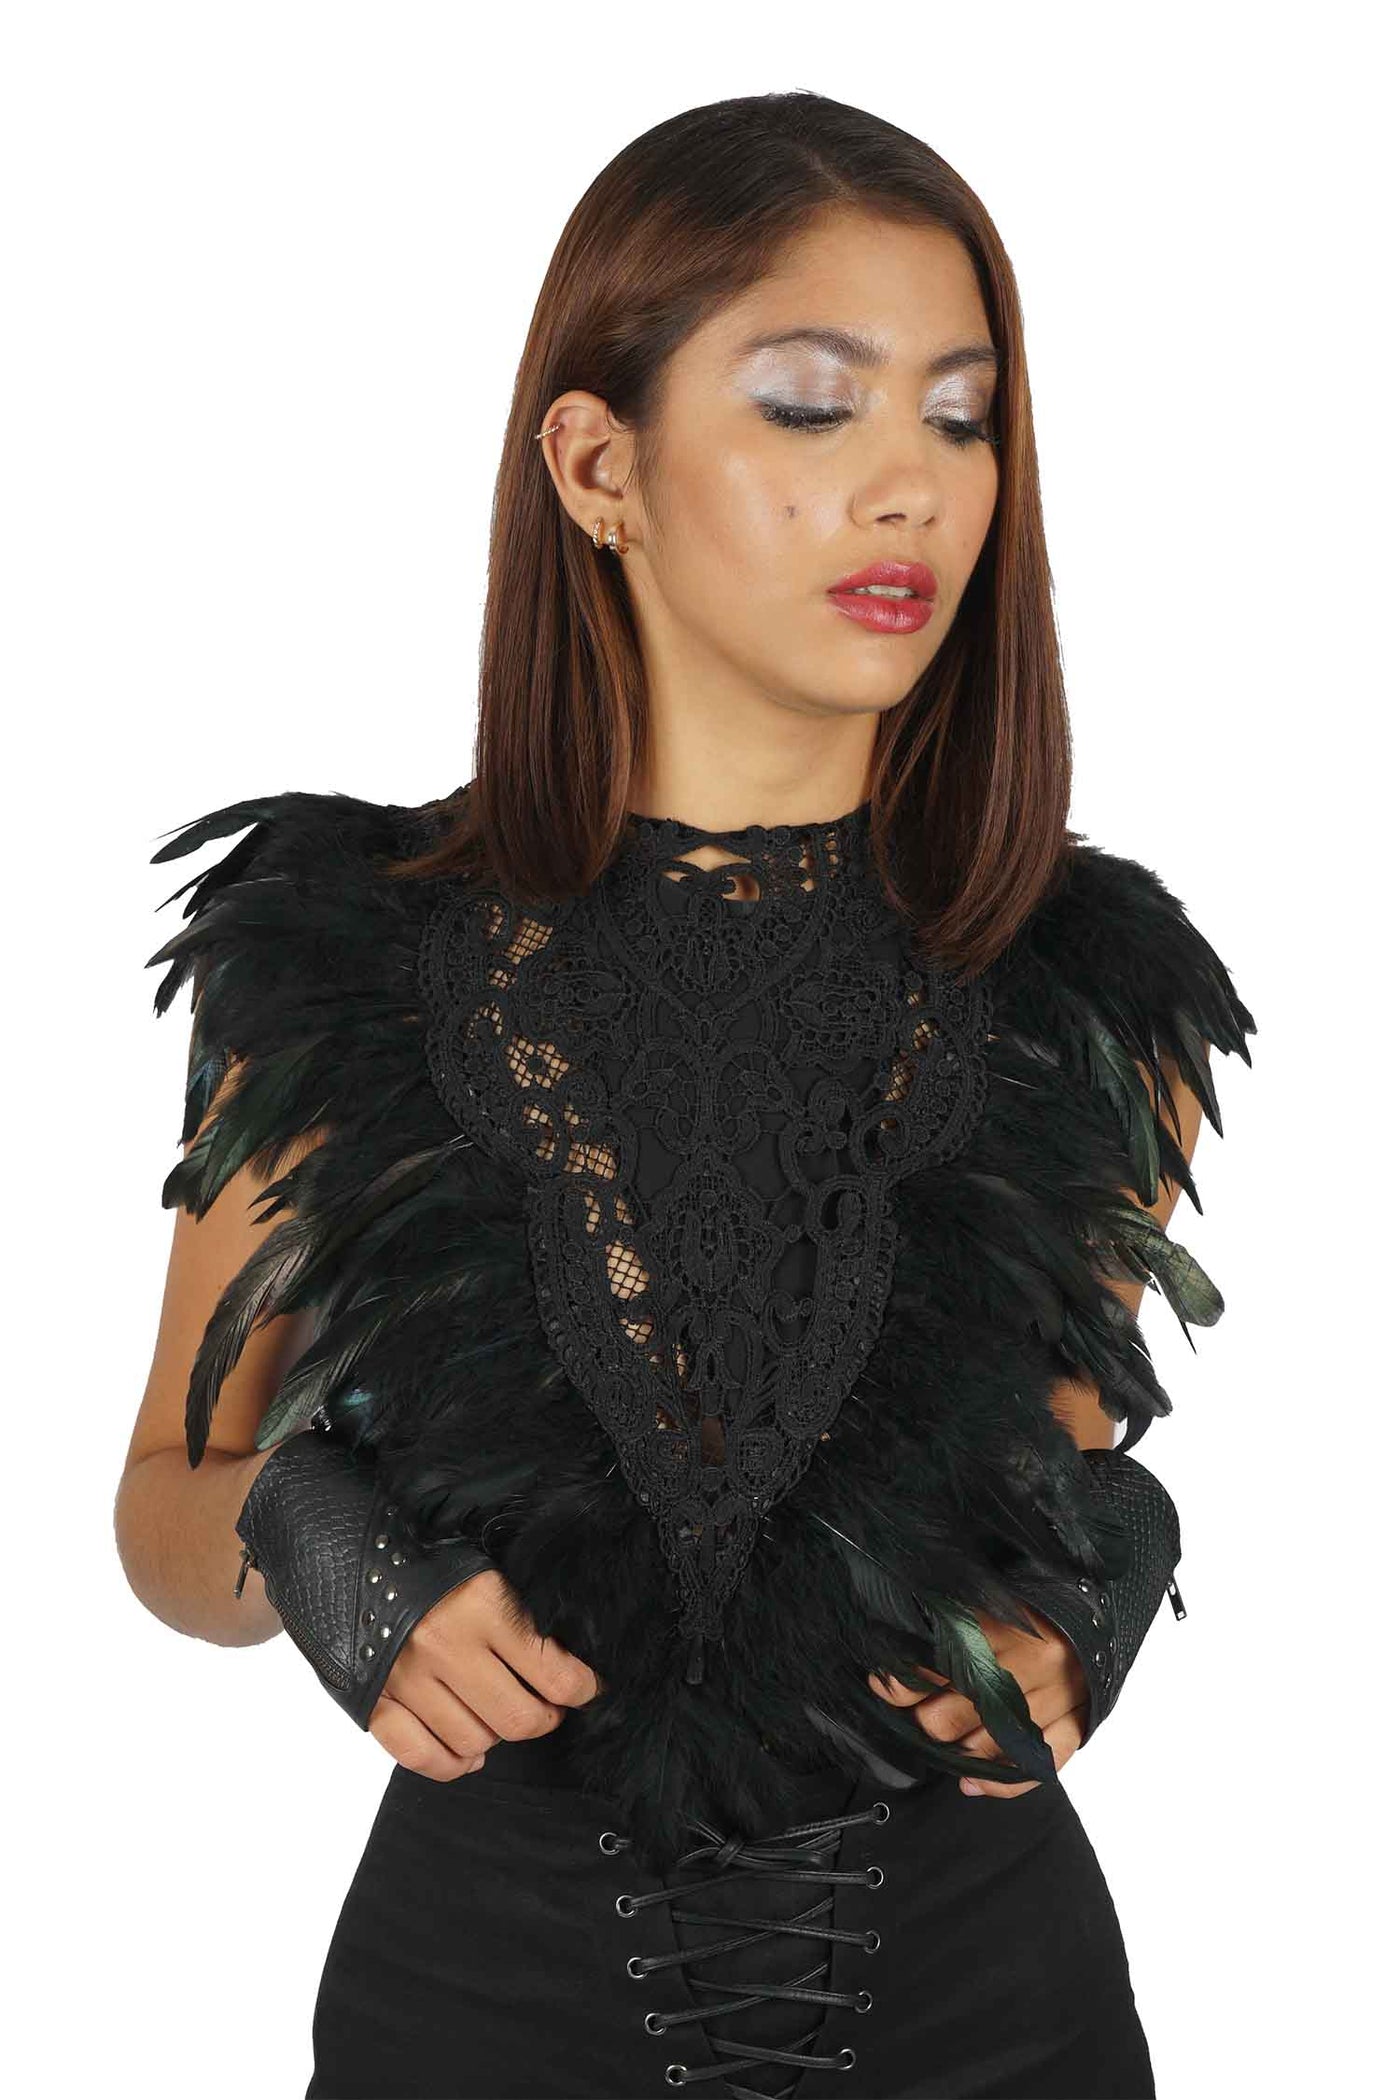 woman wearing a Boho Lace Top with Feathers from Love Khaos